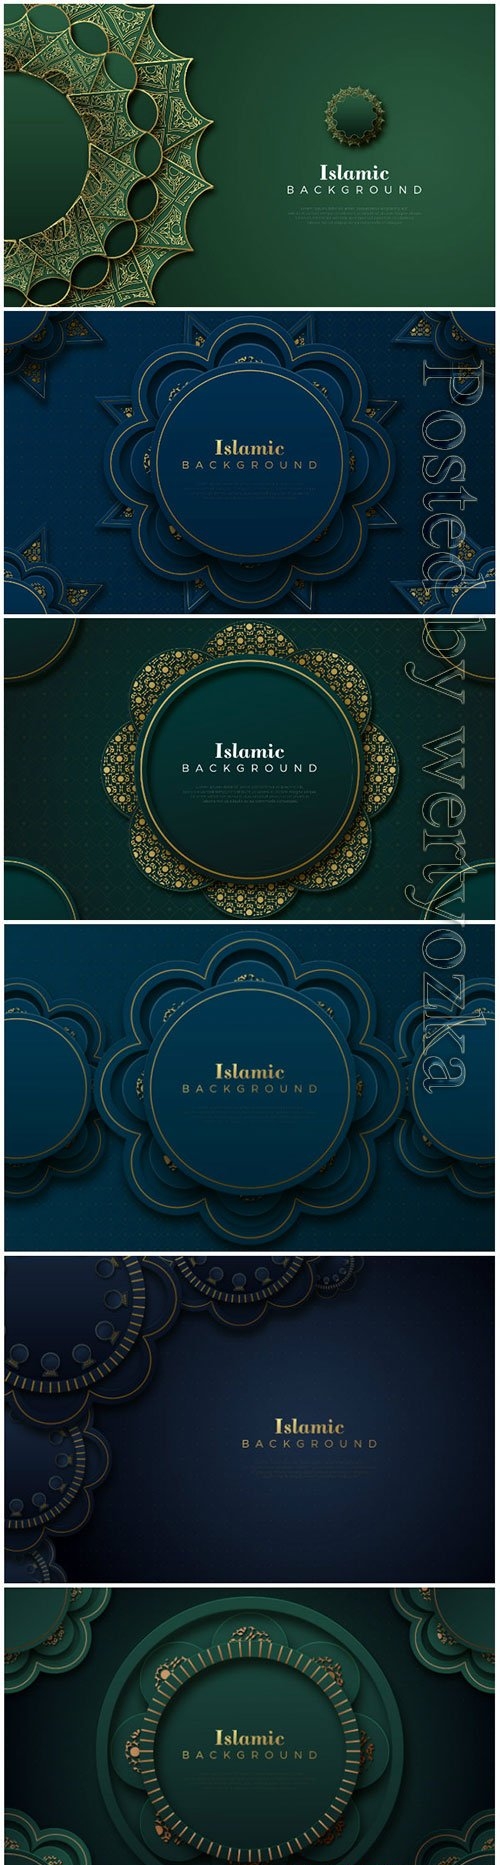 Islamic vector background with classic ornaments